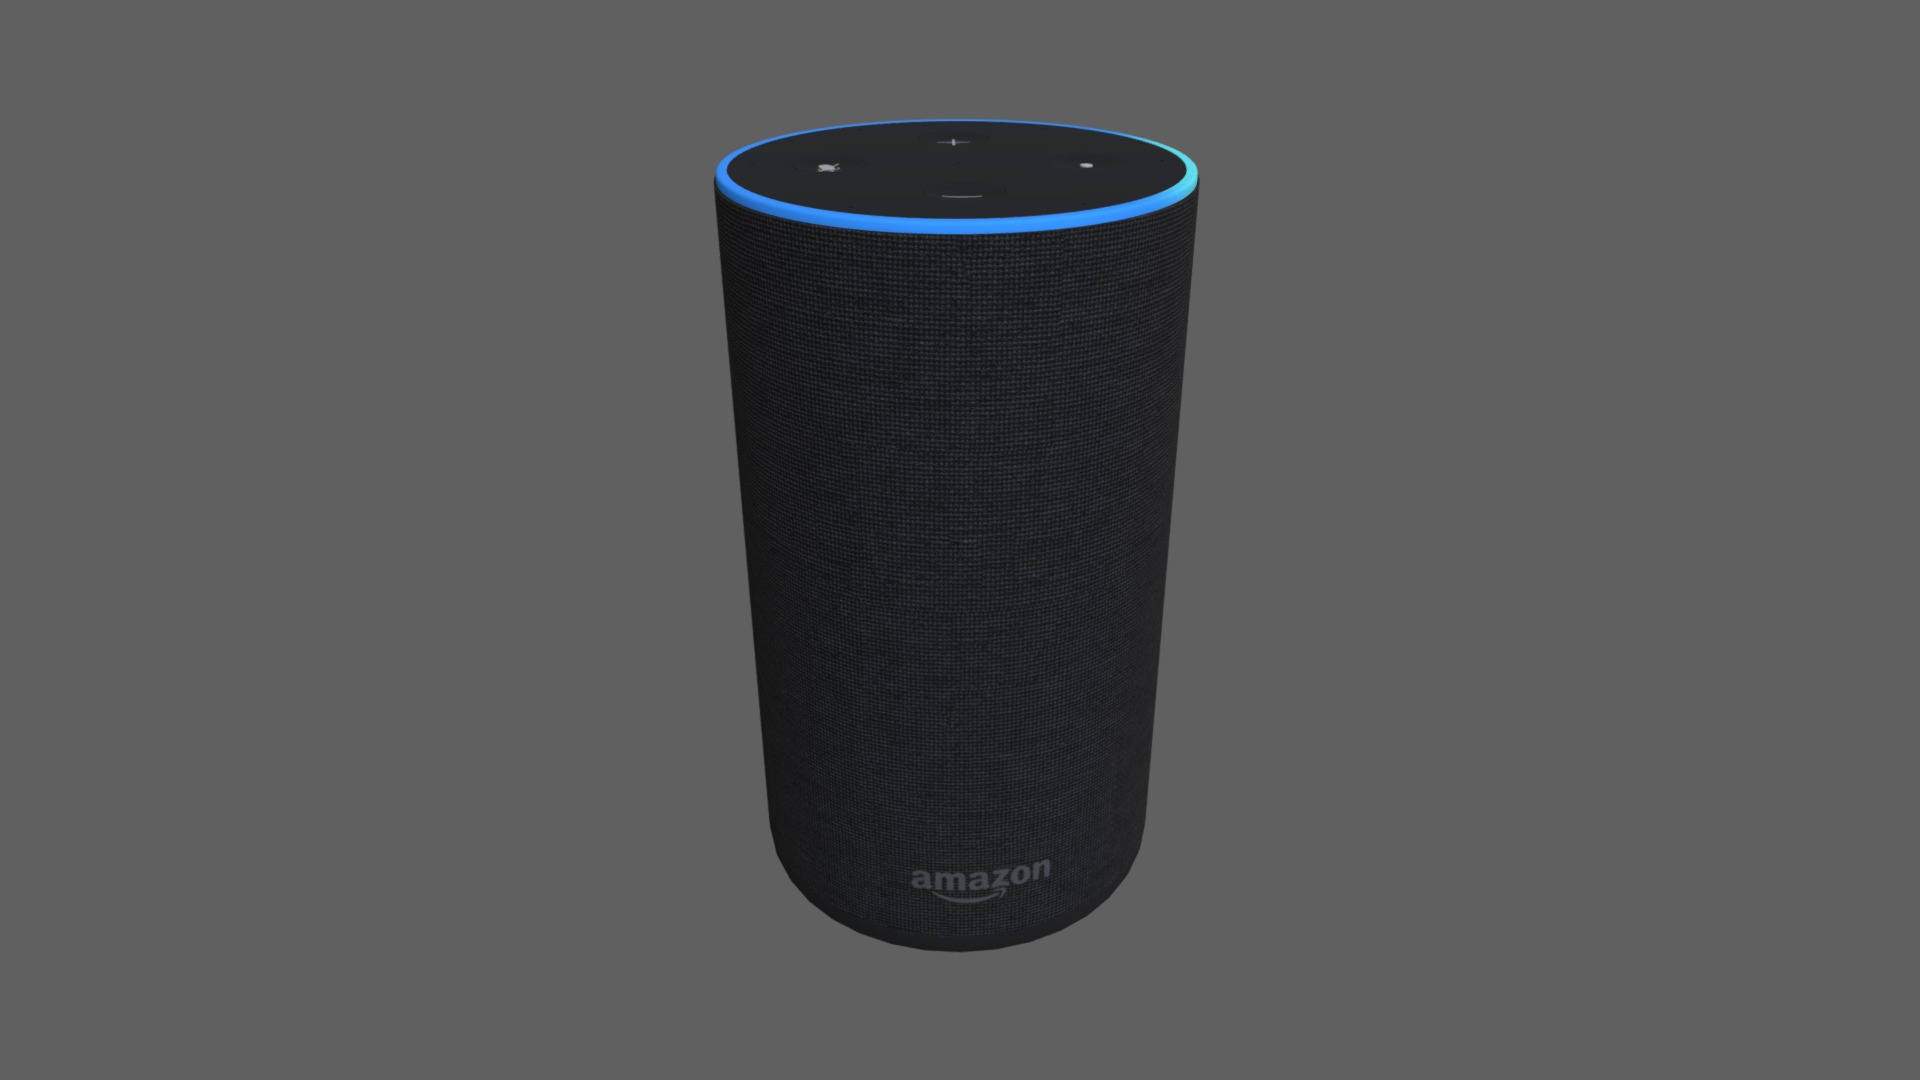 3D model Amazon echo new black - This is a 3D model of the Amazon echo new black. The 3D model is about a black cylindrical object.